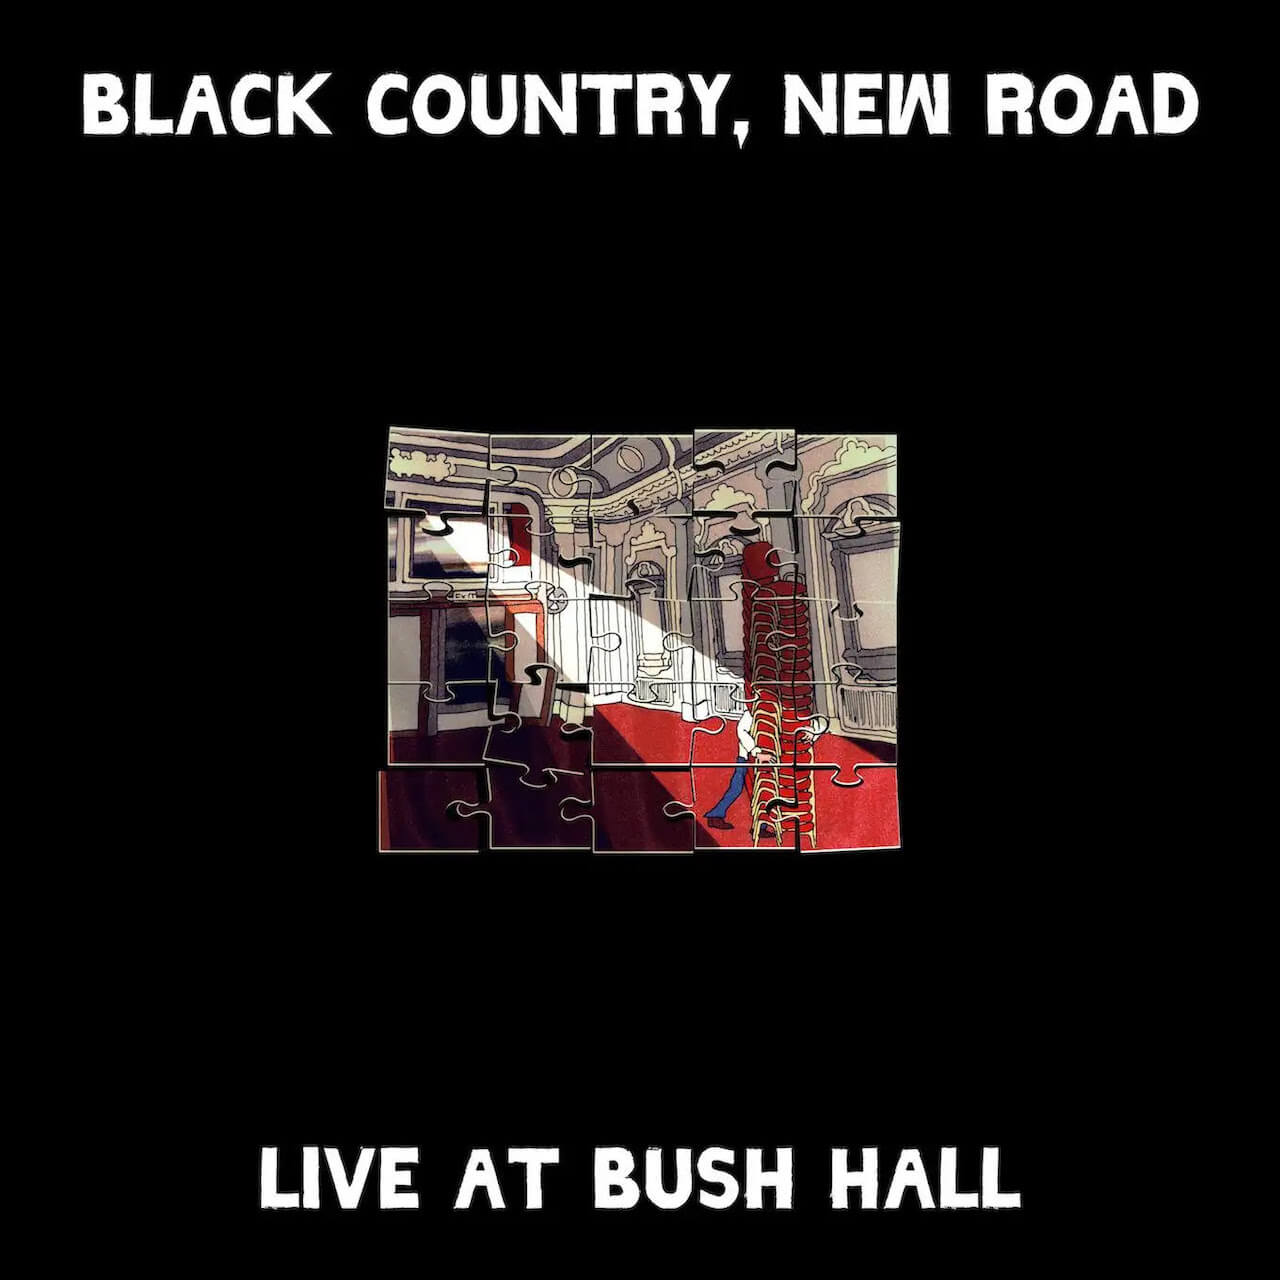 Black Country, New Road──2023年4月3日、彼らの「今」を訊く interview230404-blackcountrynewroad-1